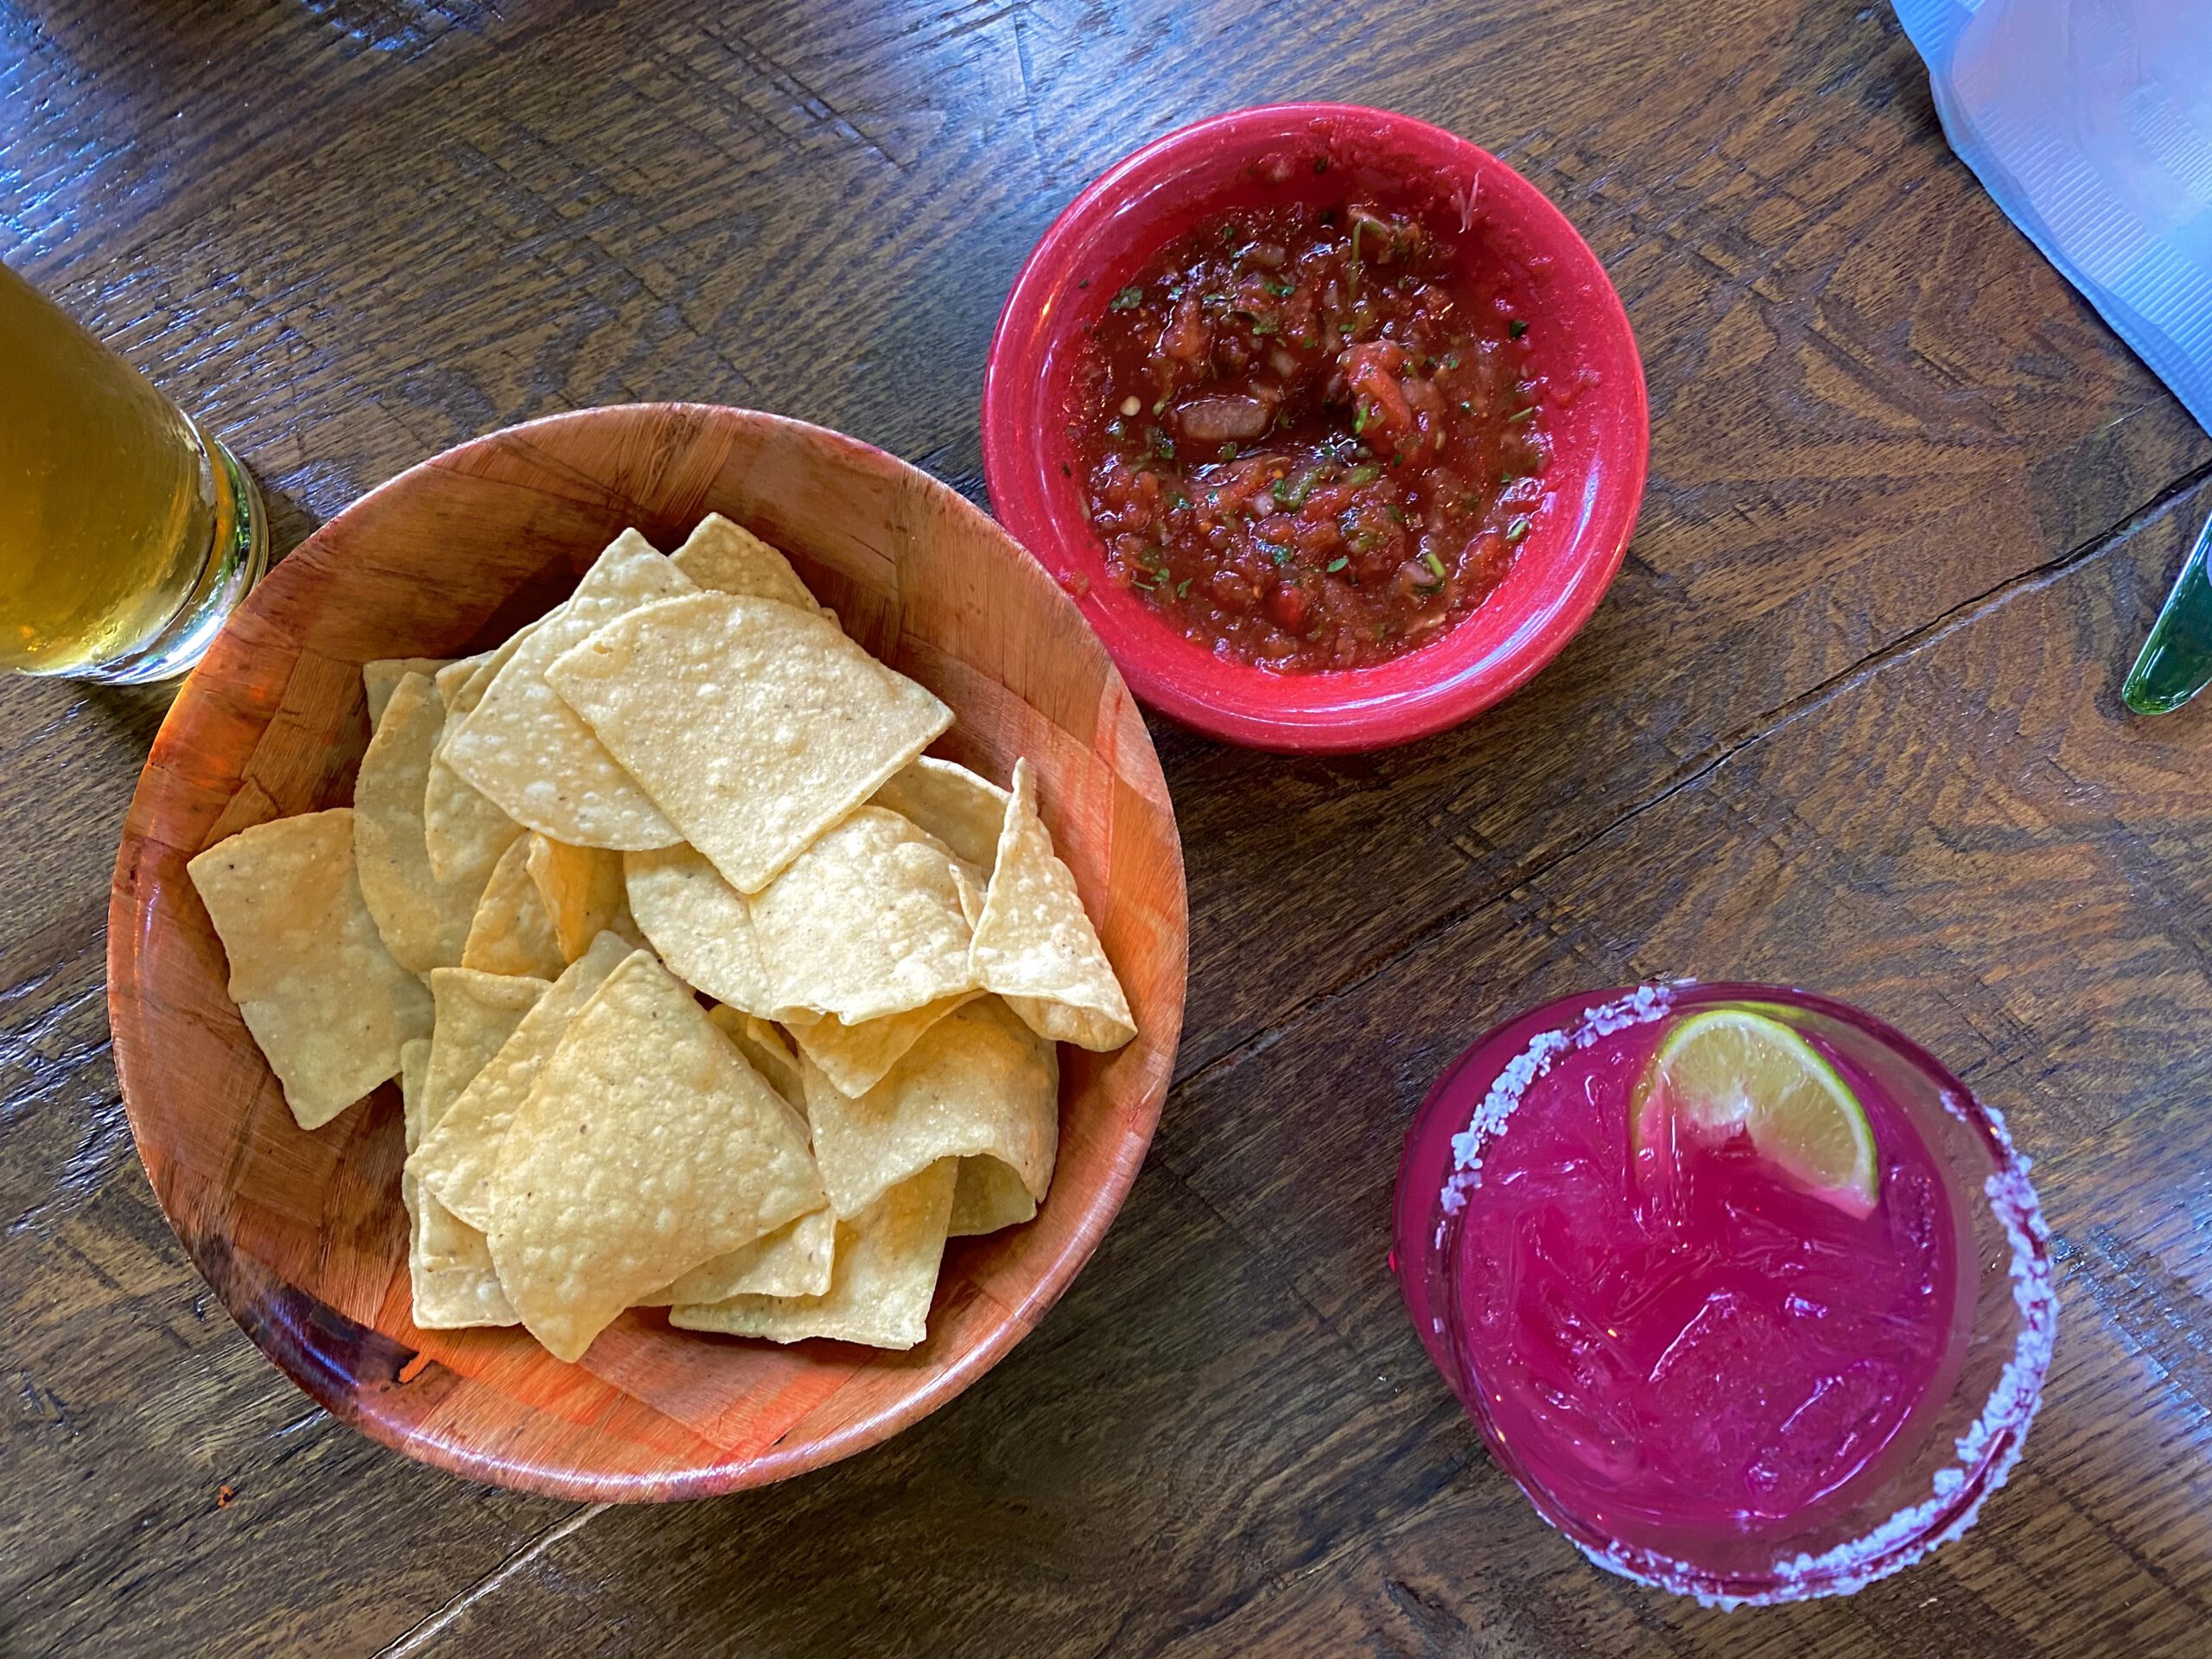 Prickly pear margarita and chips and salsa at the Bit and Spur Saloon in Springdale Utah